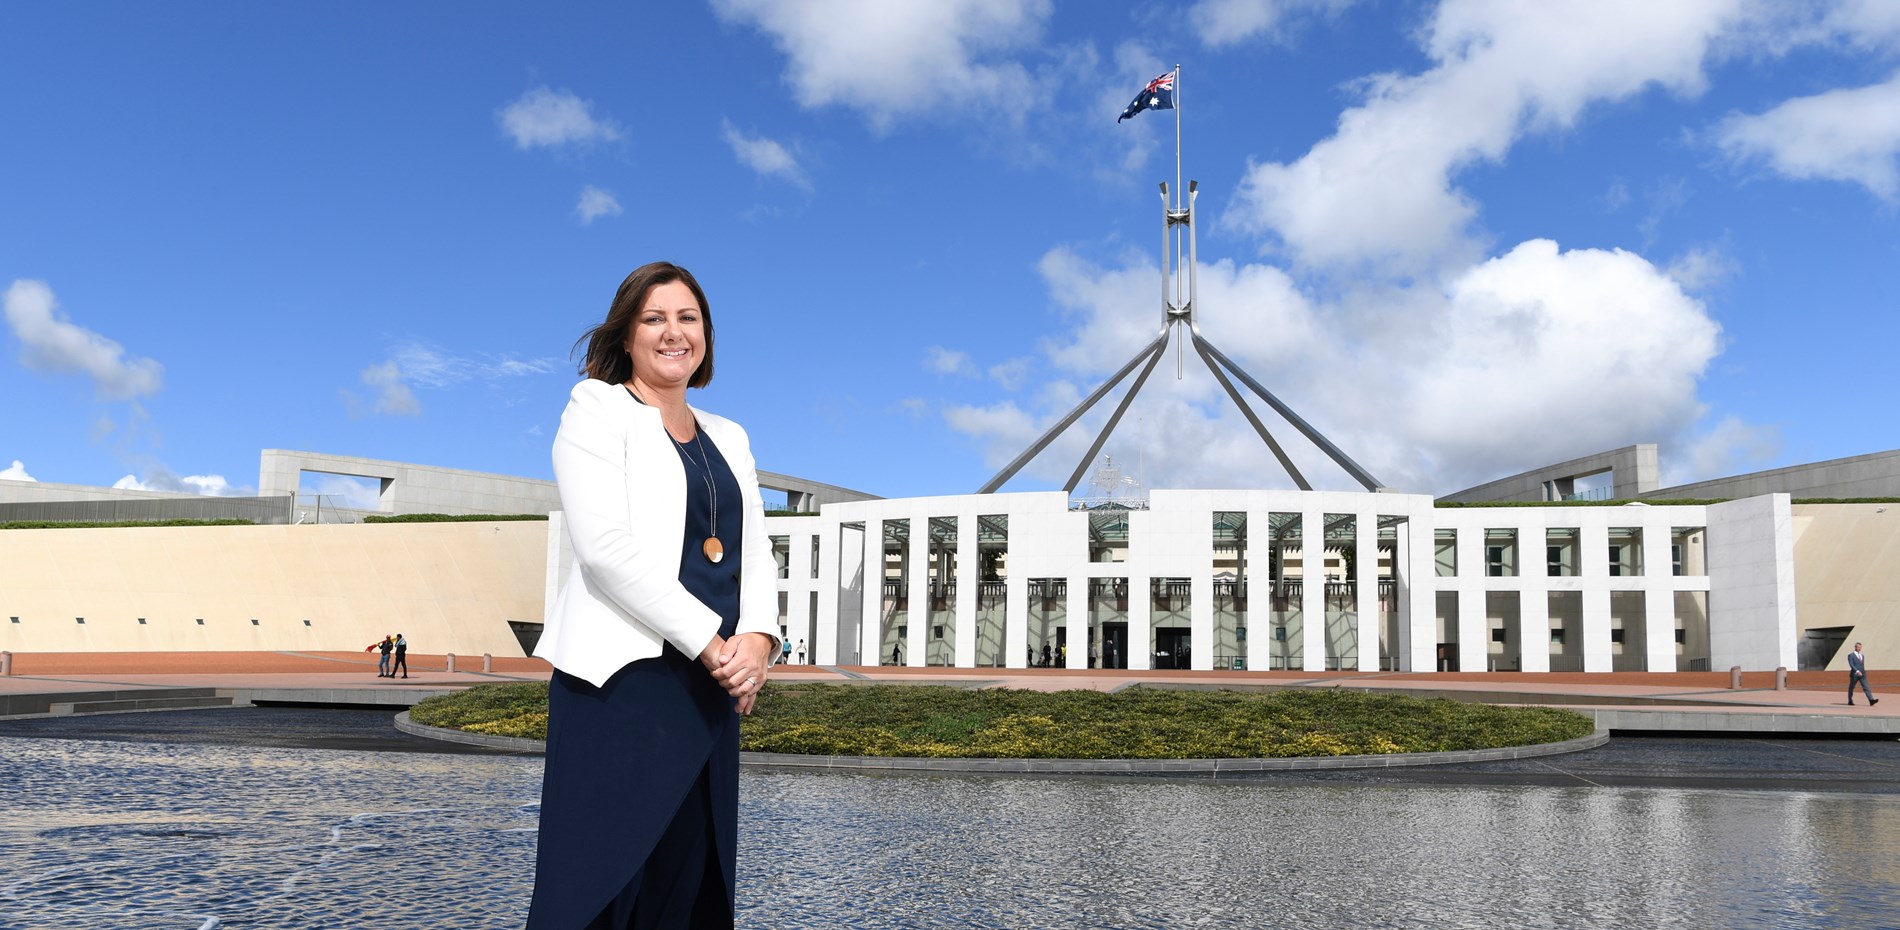 ABC Canberra - COVID-19 restrictions, women in Parliament  Main Image